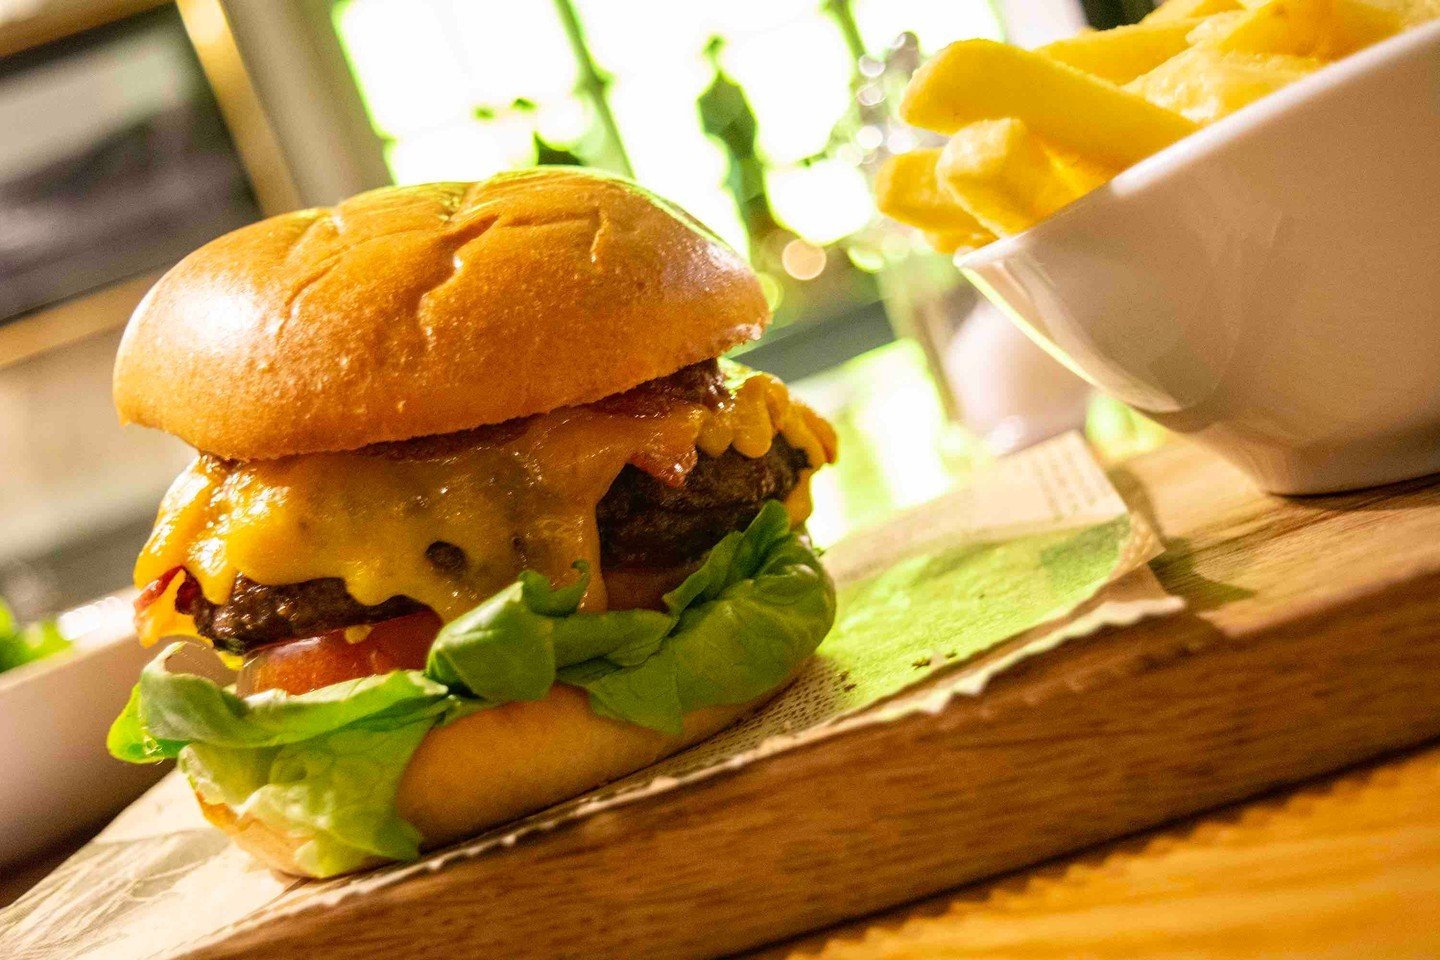 📸 Station Master Burger 🍔

Early Bird Offer 🍽️ 2 courses for &euro;24.95 or 3 courses for &euro;28.95 

Available: 
🚂 5 - 6.30pm Wednesday - Friday
🚂 2 - 4pm Saturday
🚂 12.30 - 3pm Sunday

Book your table via our website. 

#railwaytavern #faha